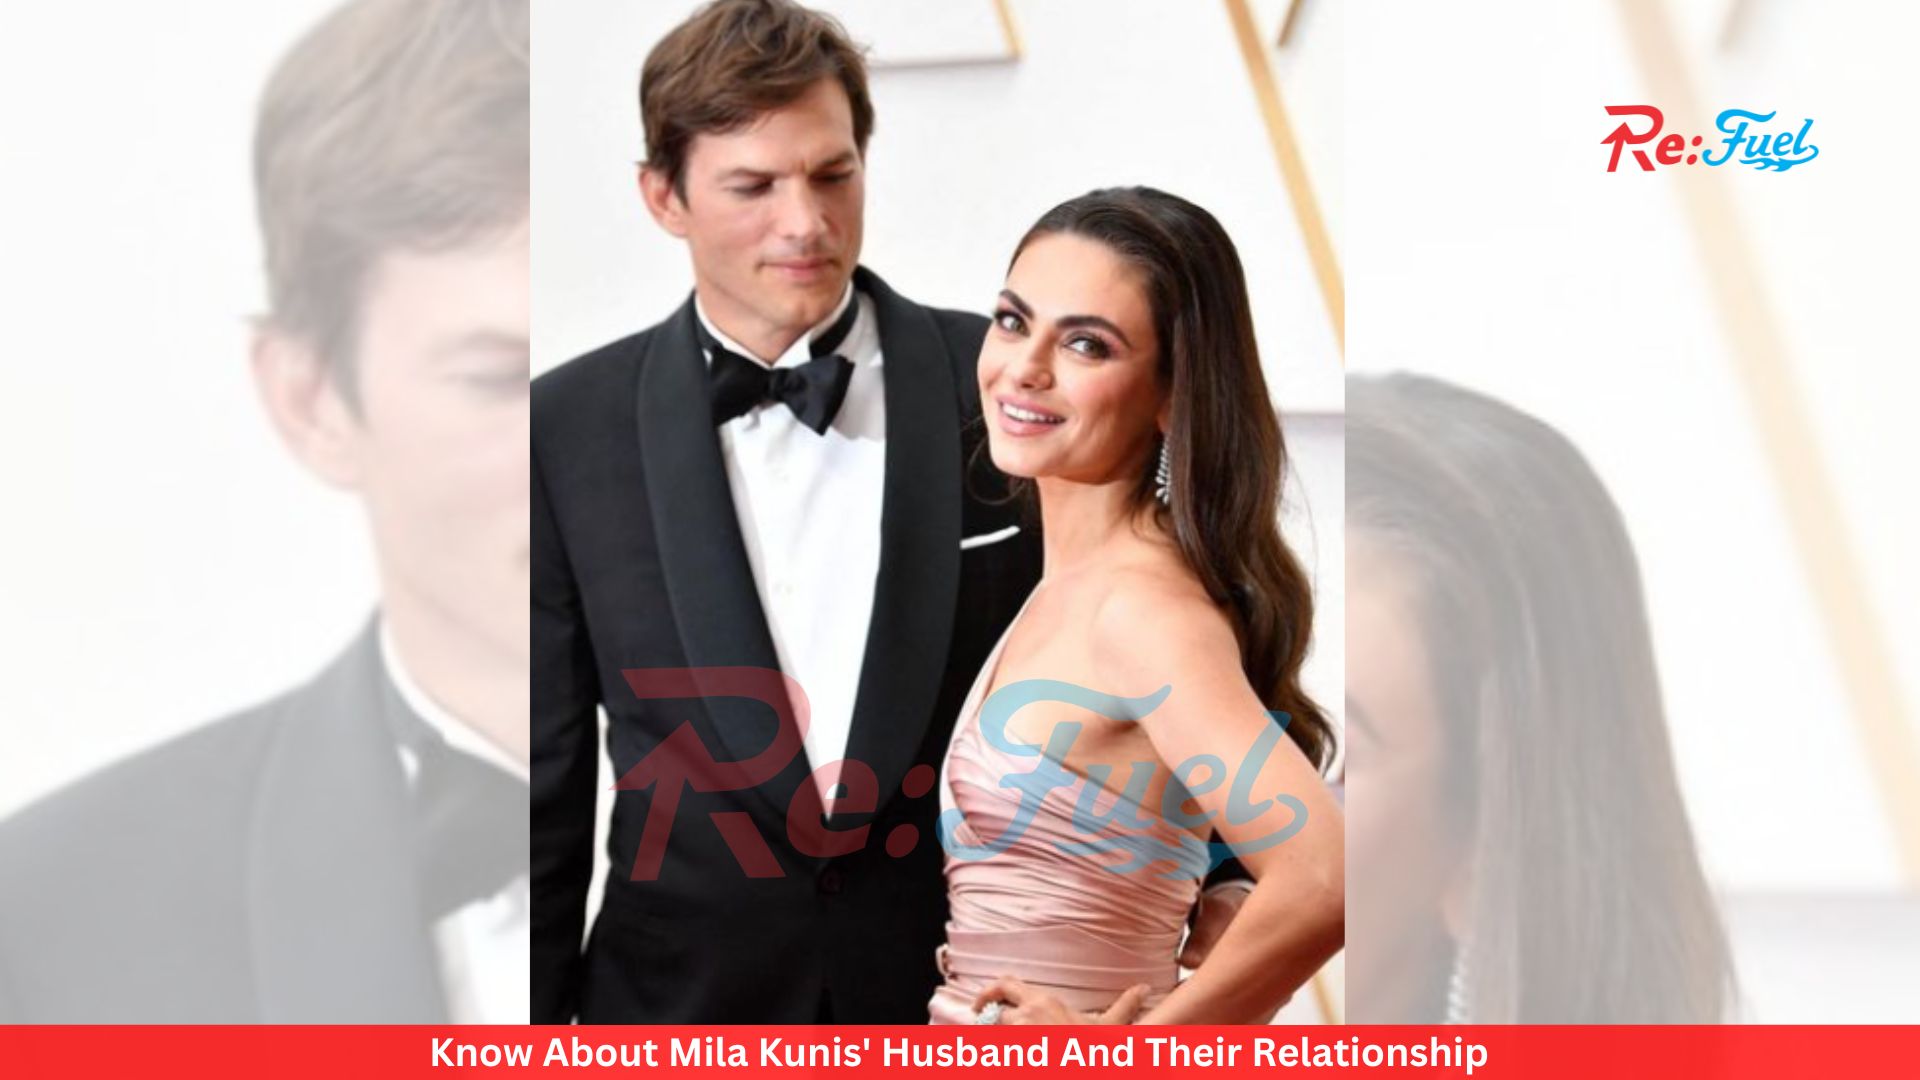 Know About Mila Kunis' Husband And Their Relationship